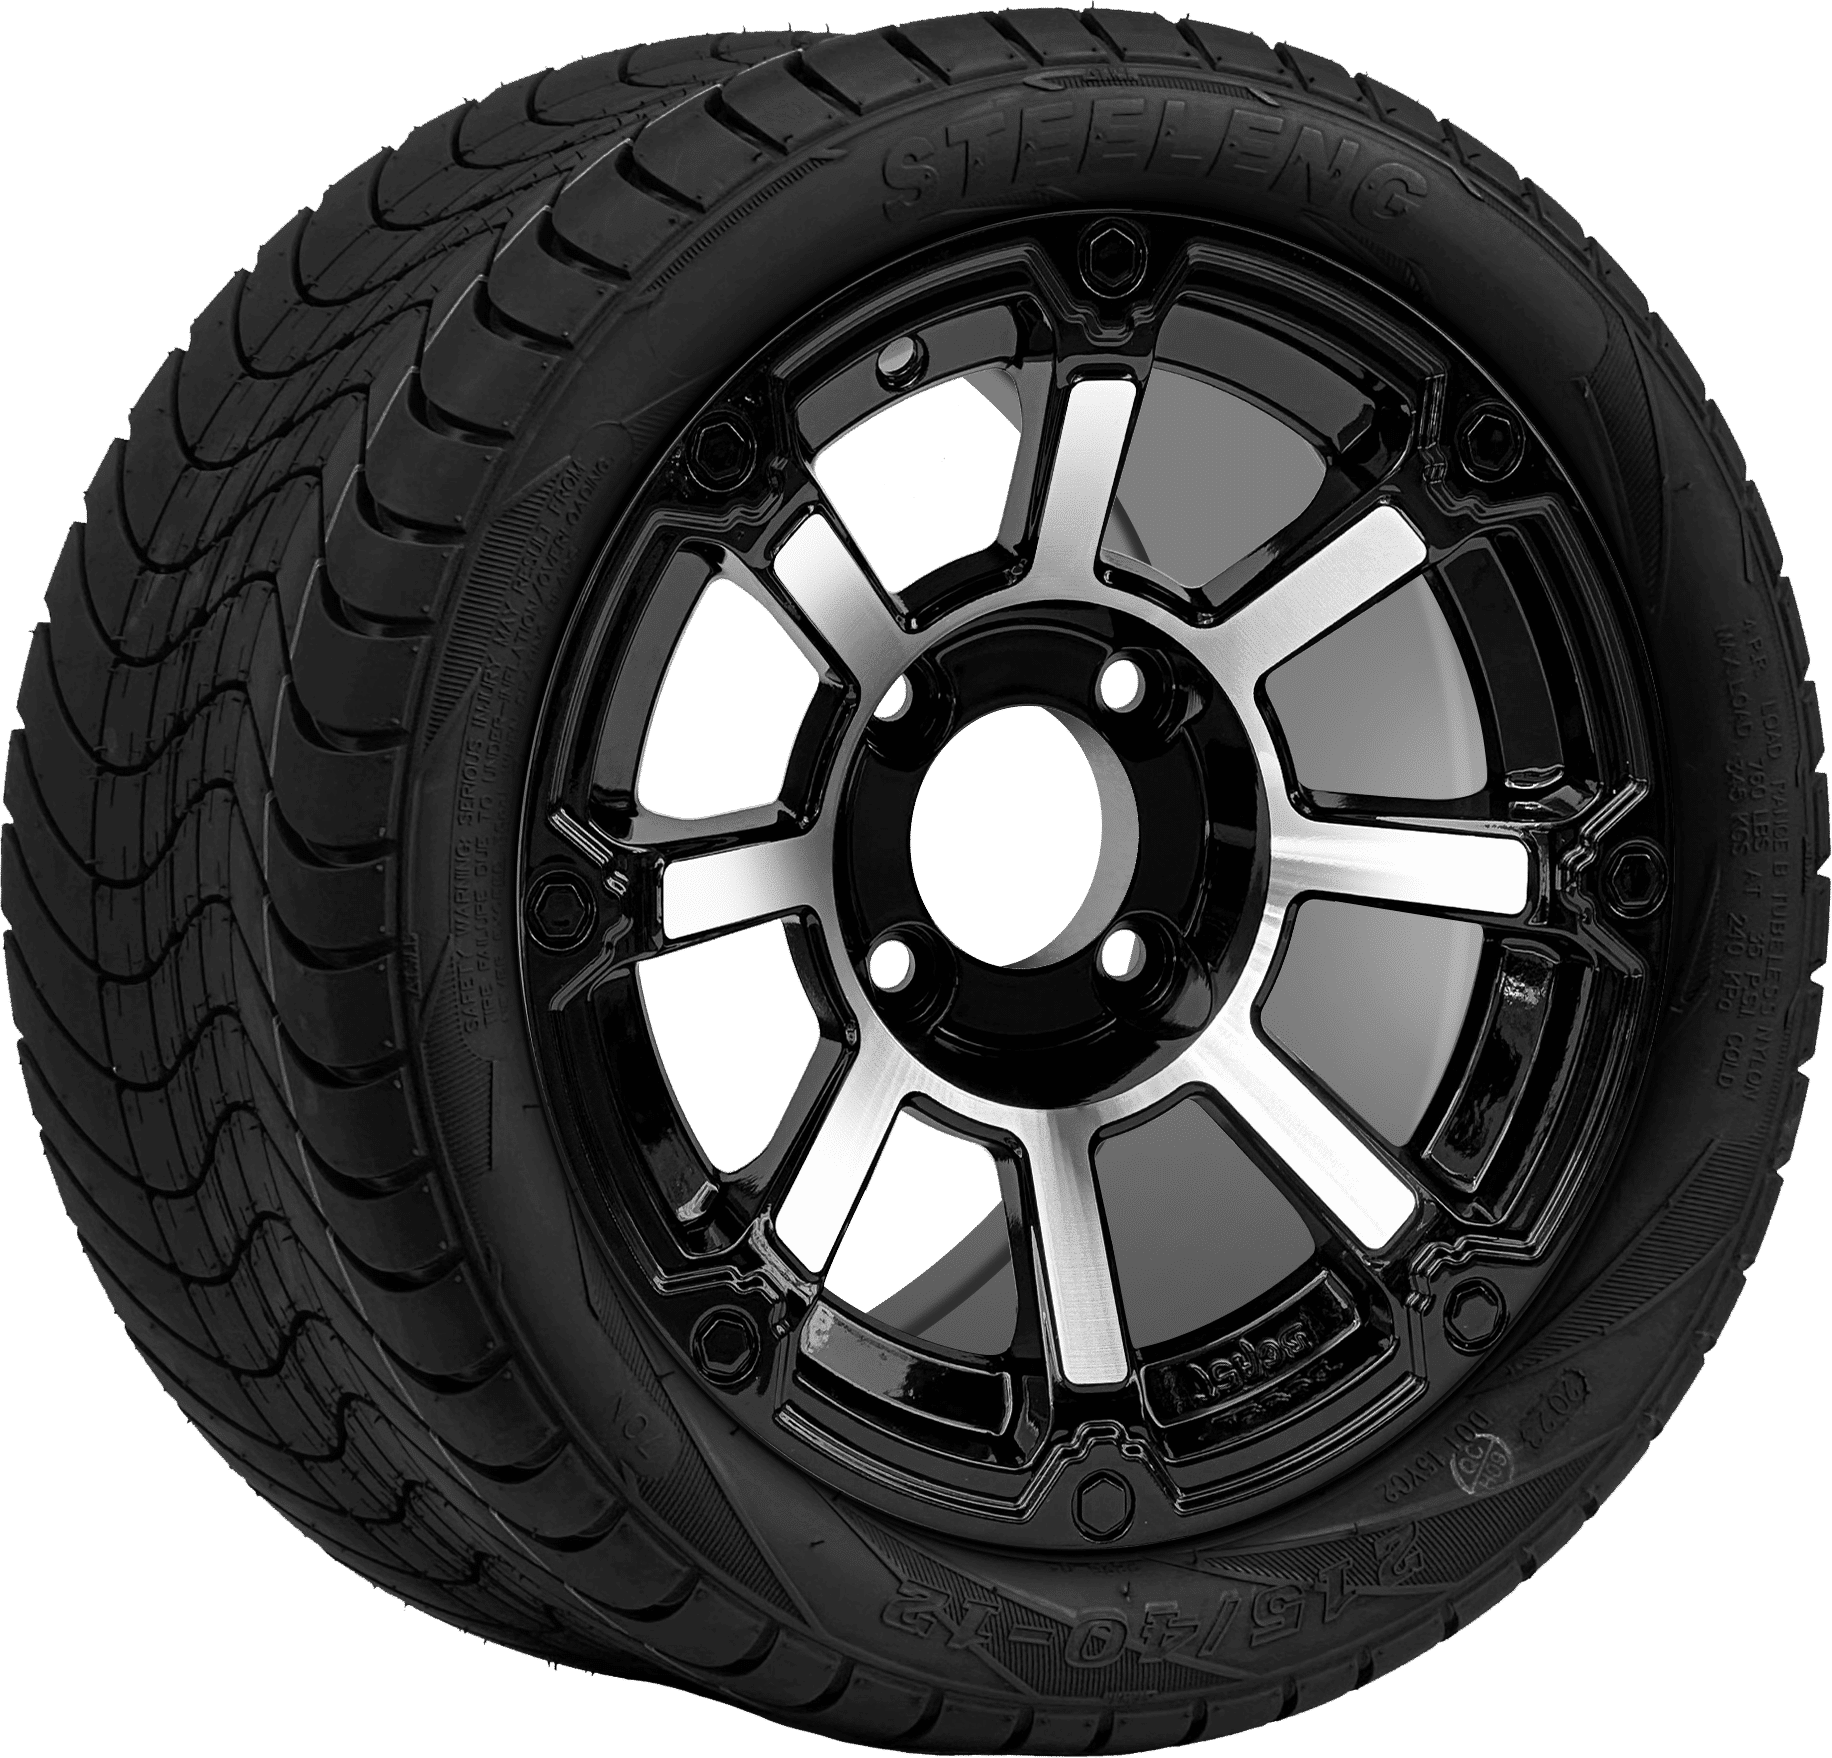 12″ CYCLOPS MACHINED/BLACK WHEEL – ALUMINUM ALLOY / STEELENG 215/40-12 LOW PROFILE TIRE DOT APPROVED